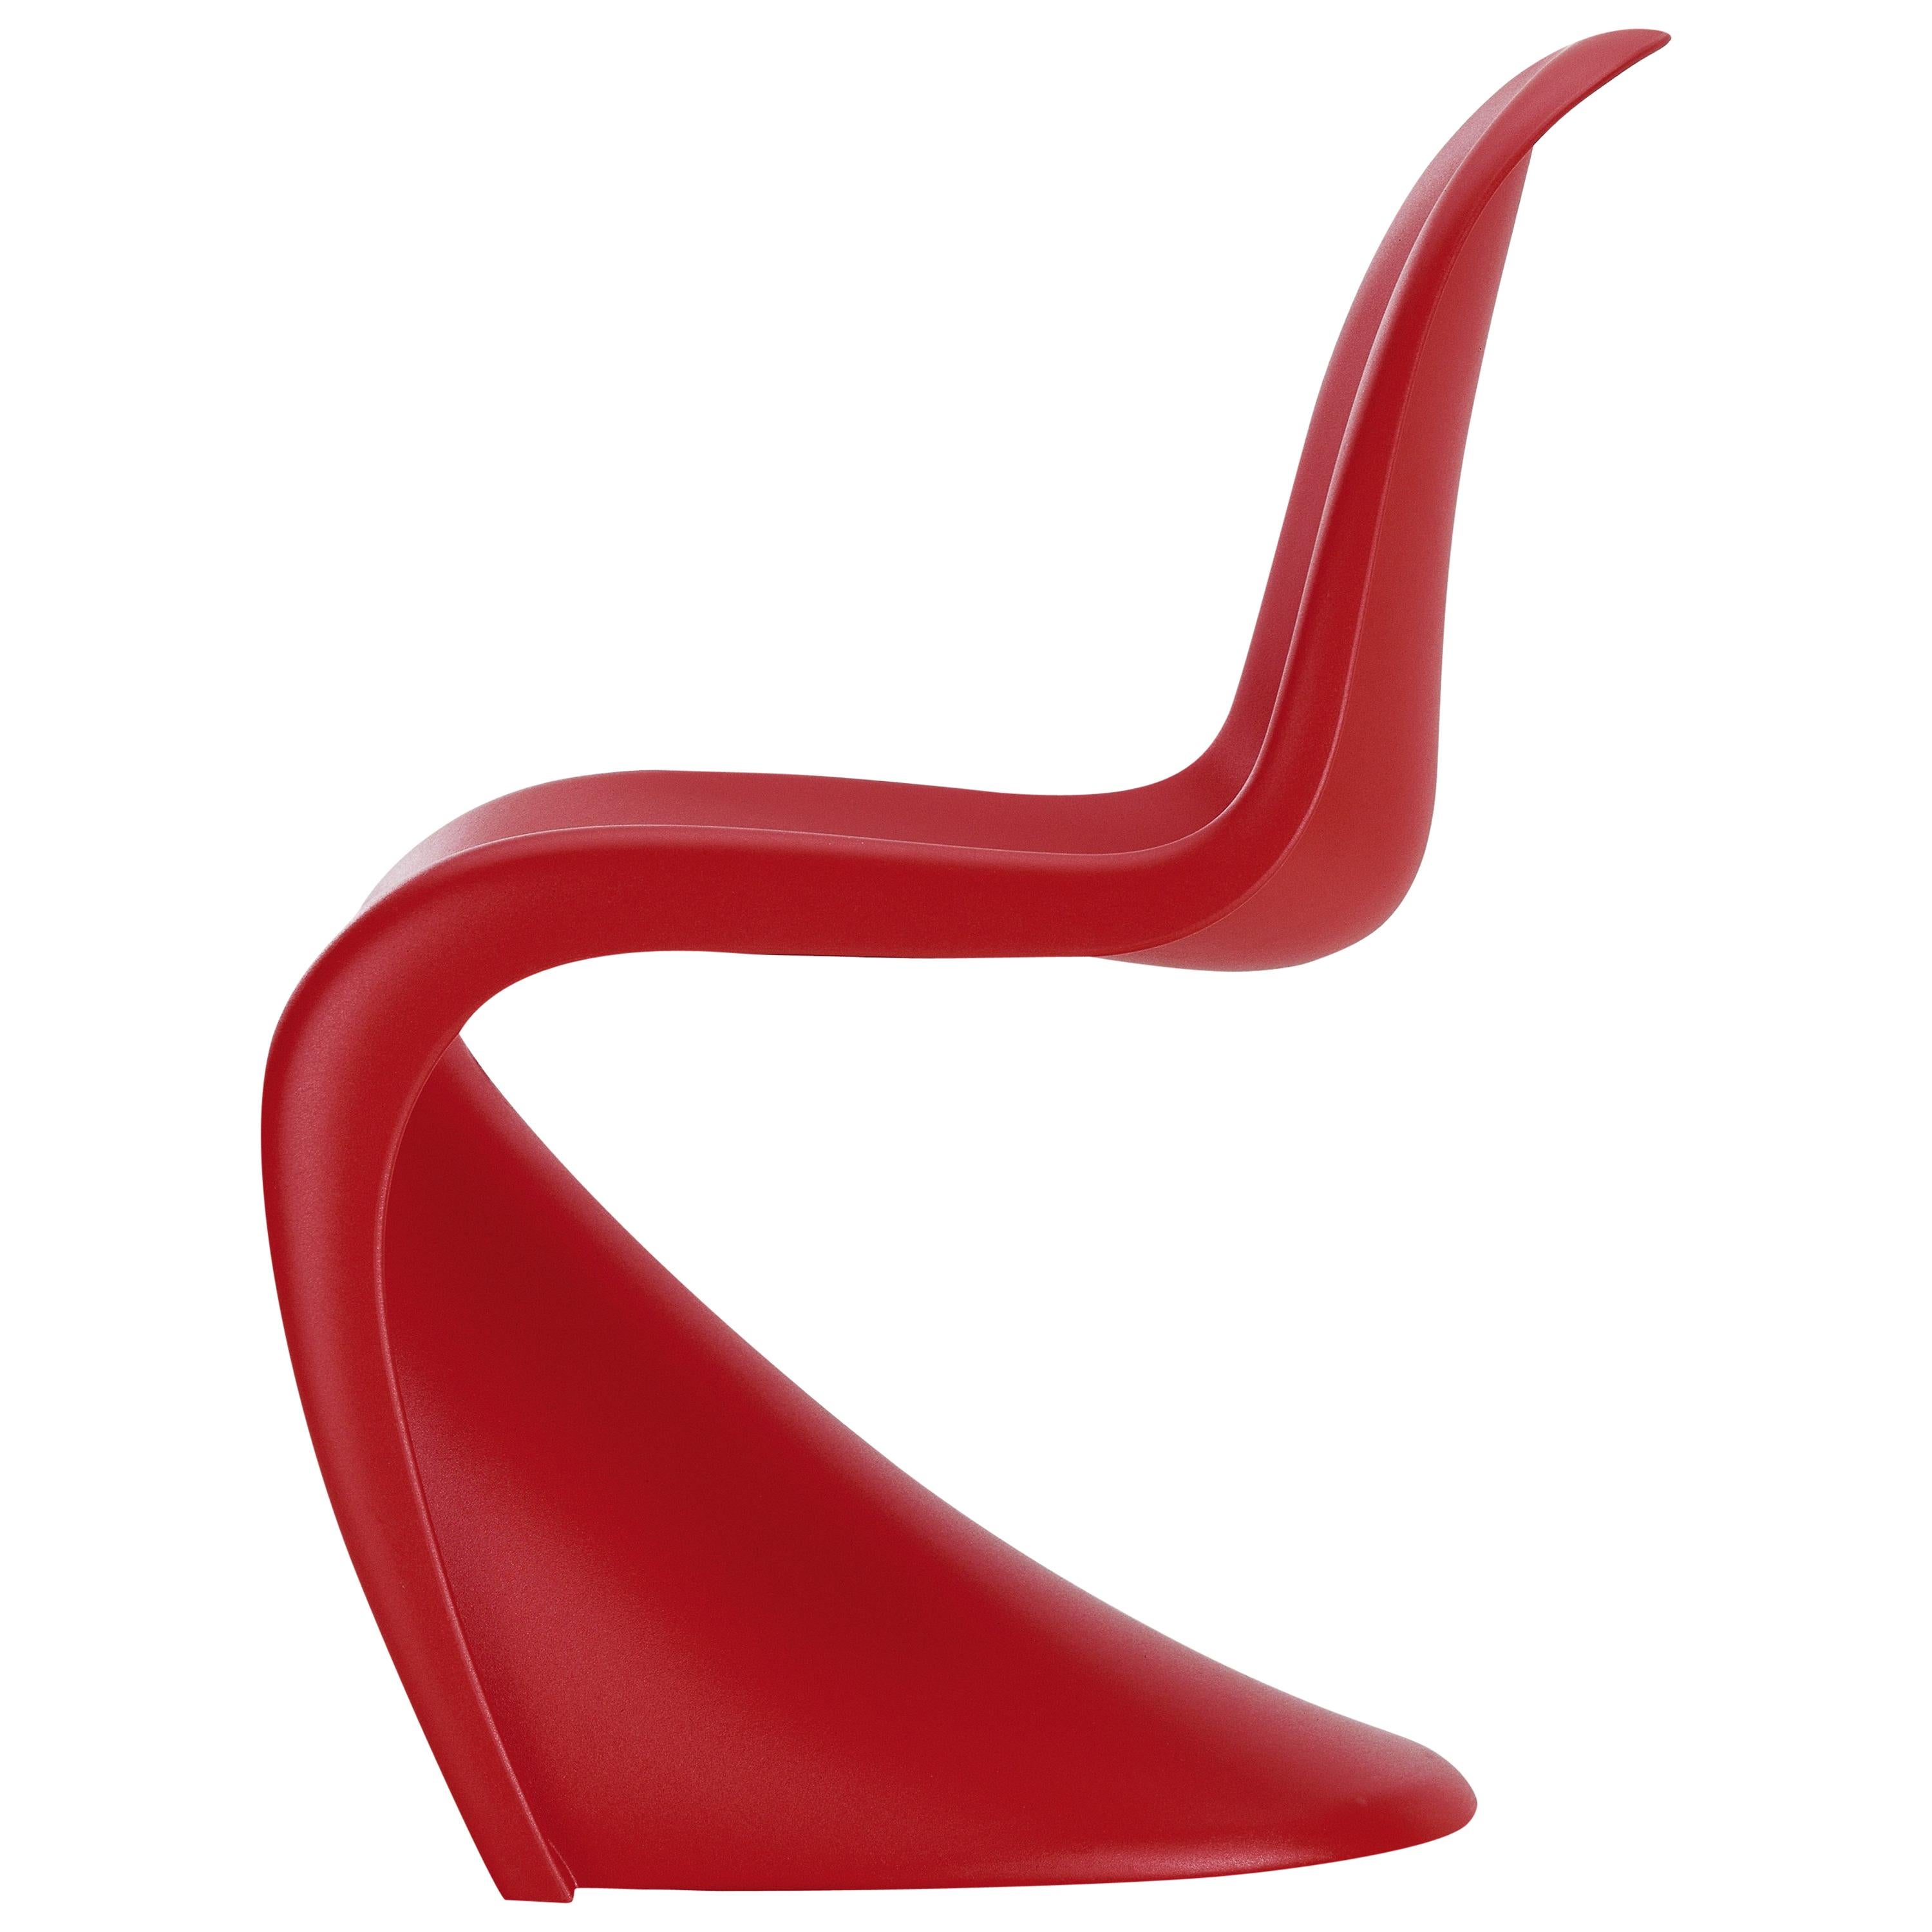 Vitra Panton Junior Chair in Classic Red by Verner Panton For Sale